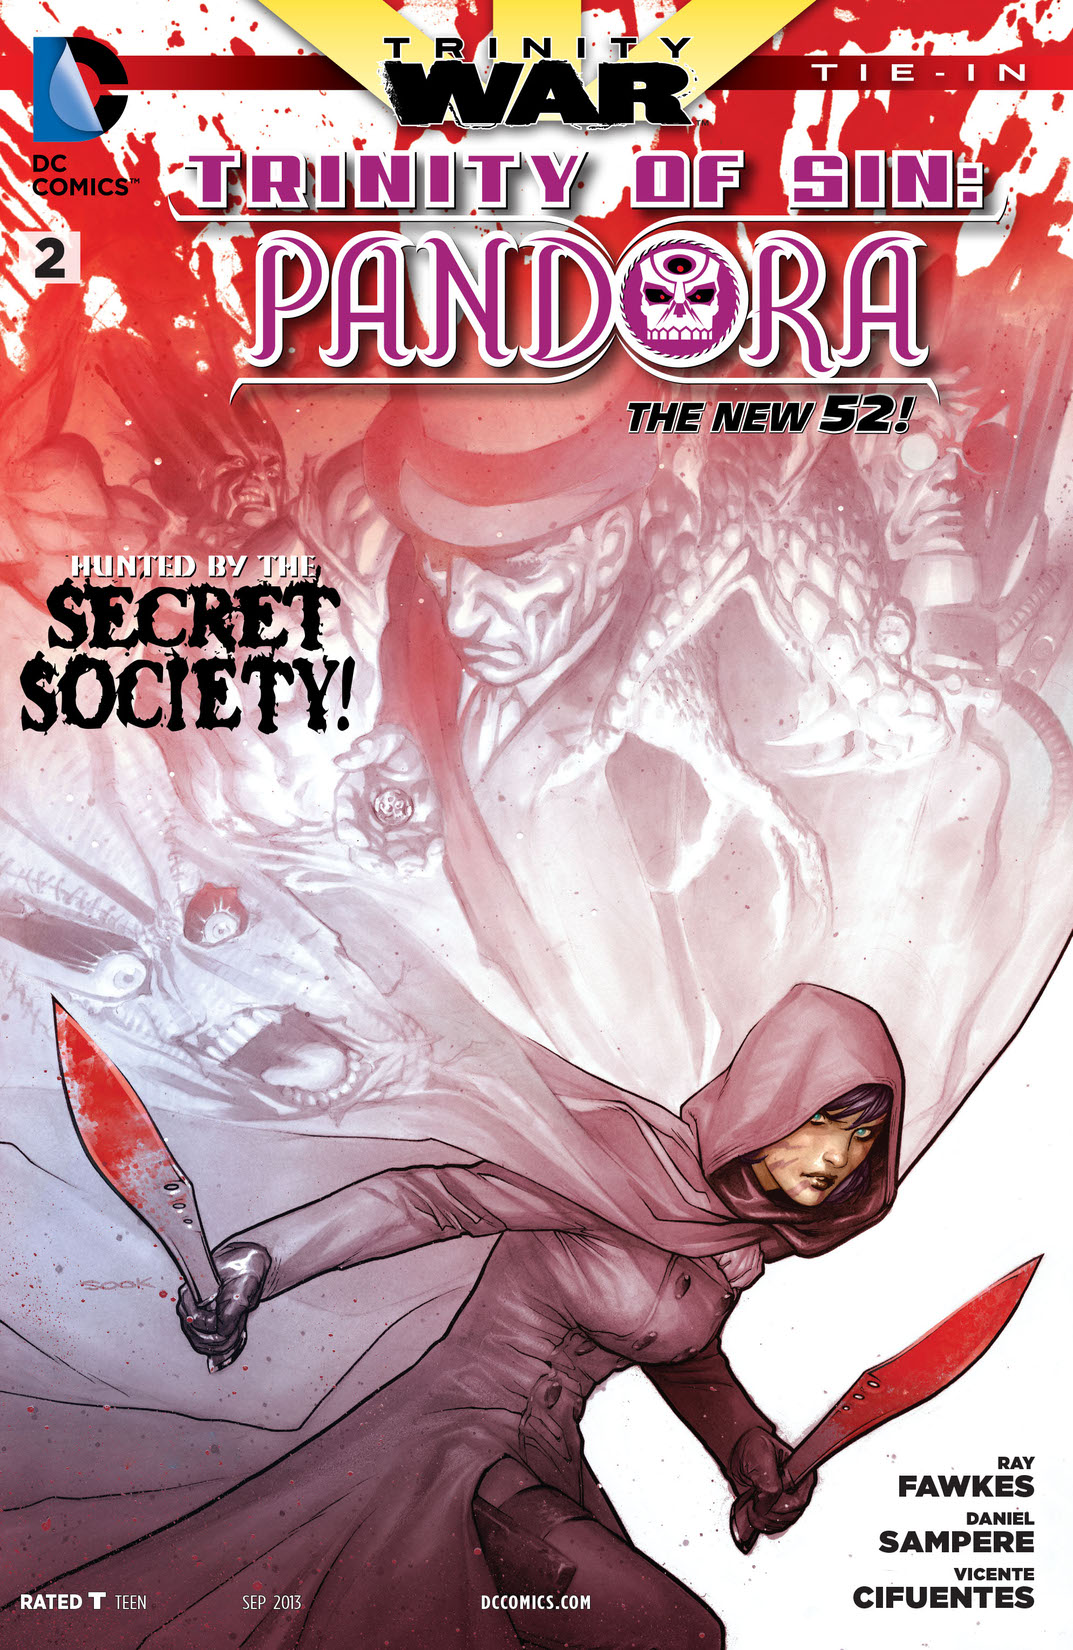 Trinity of Sin: Pandora #2 preview images